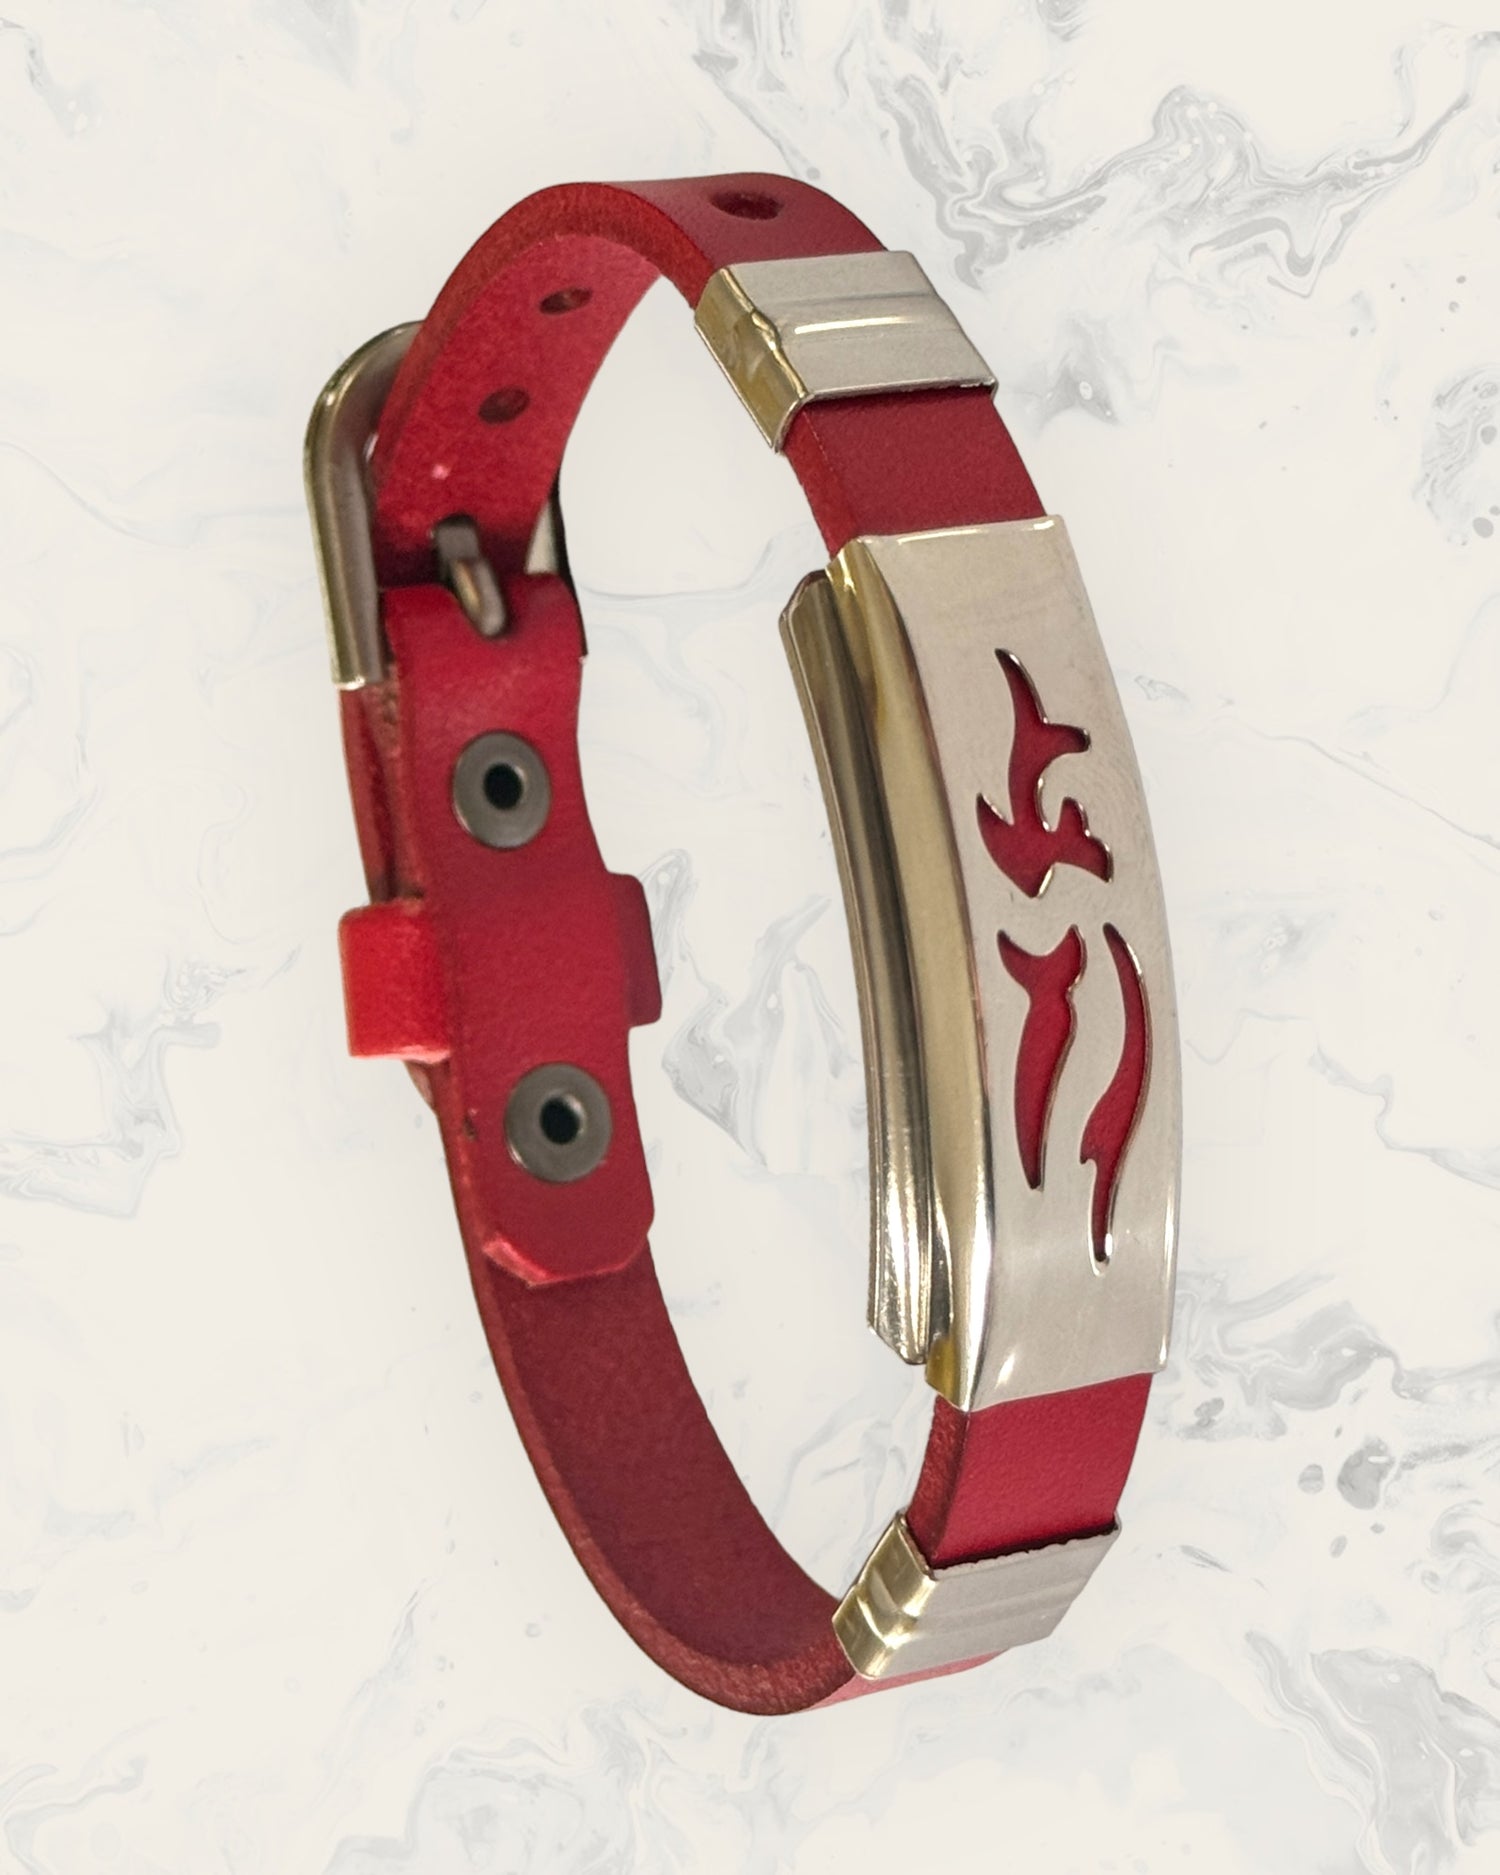 Natural Pain Relief and EMF Protection Bracelet Leather Band Color Red with Dolphin design on a silver metal slider